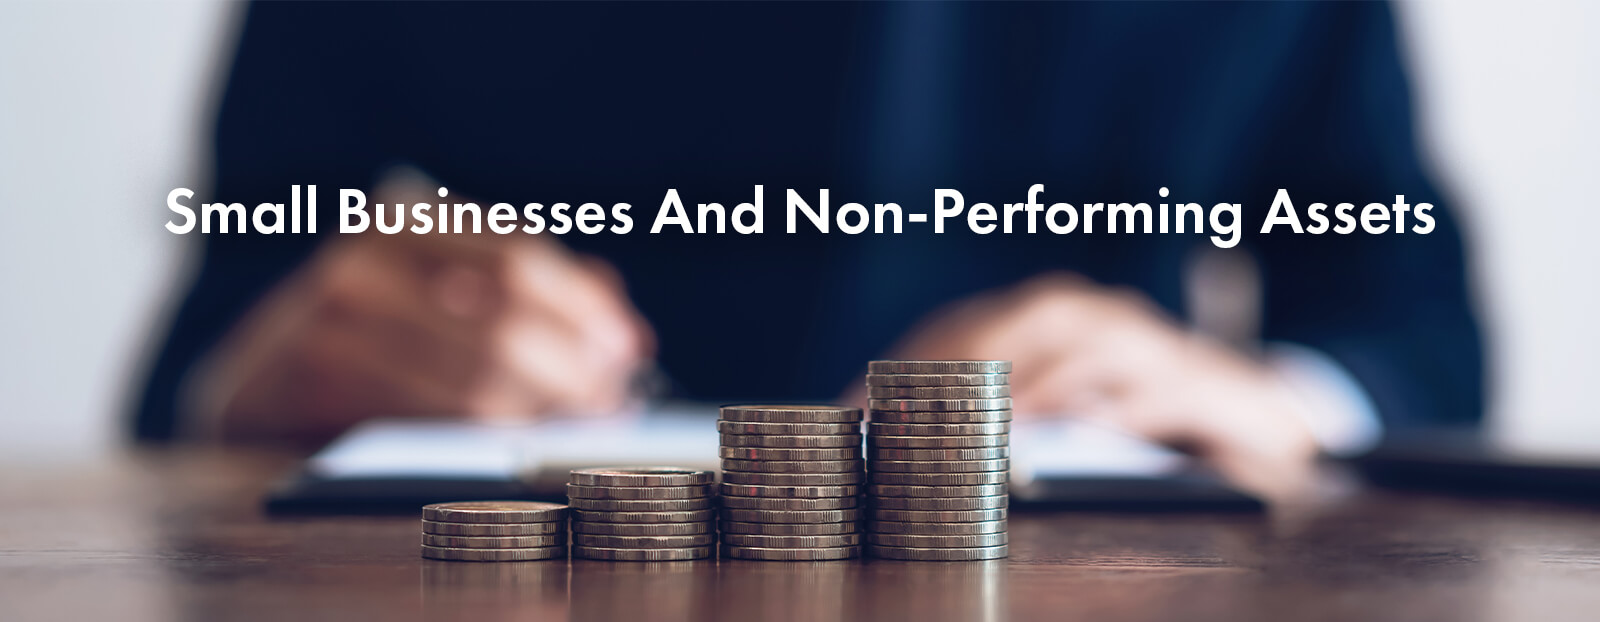 Small Businesses And Non-Performing Assets